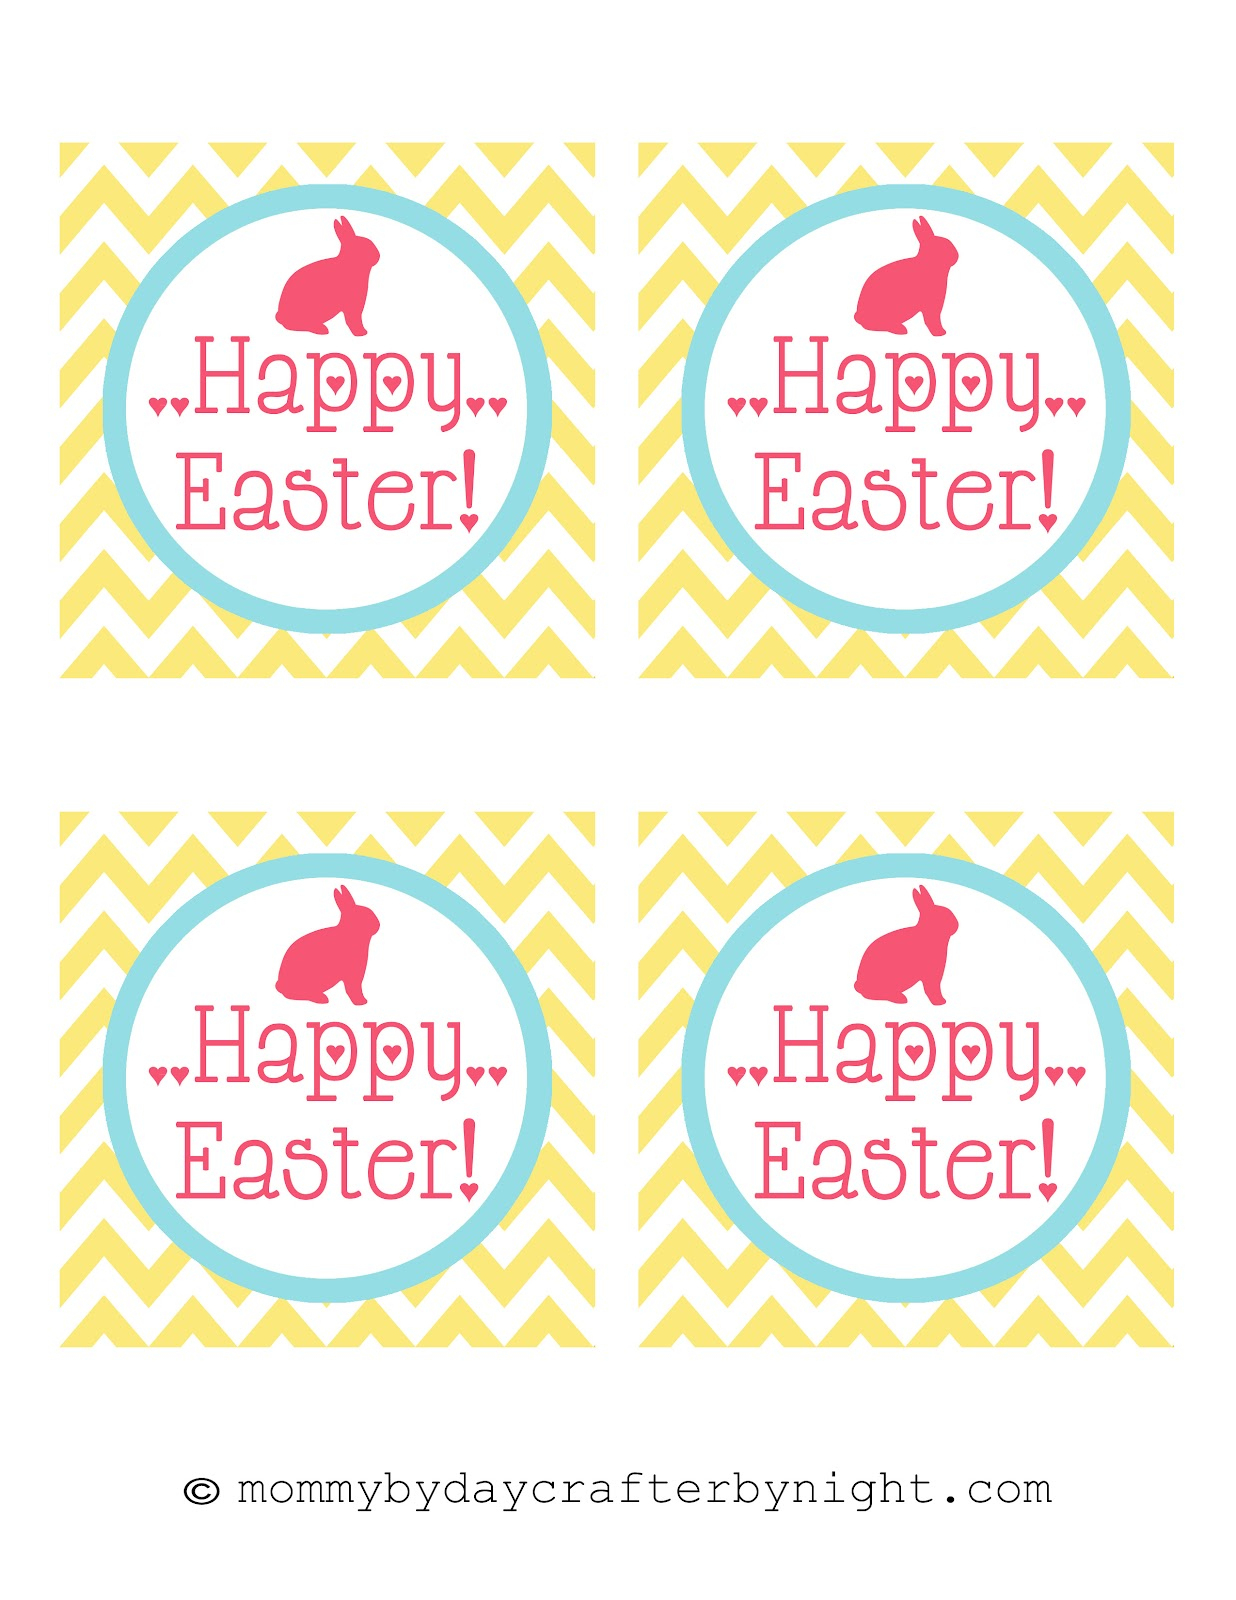 Free Printable Easter Tags – Hd Easter Images - Free Printable Easter Tags